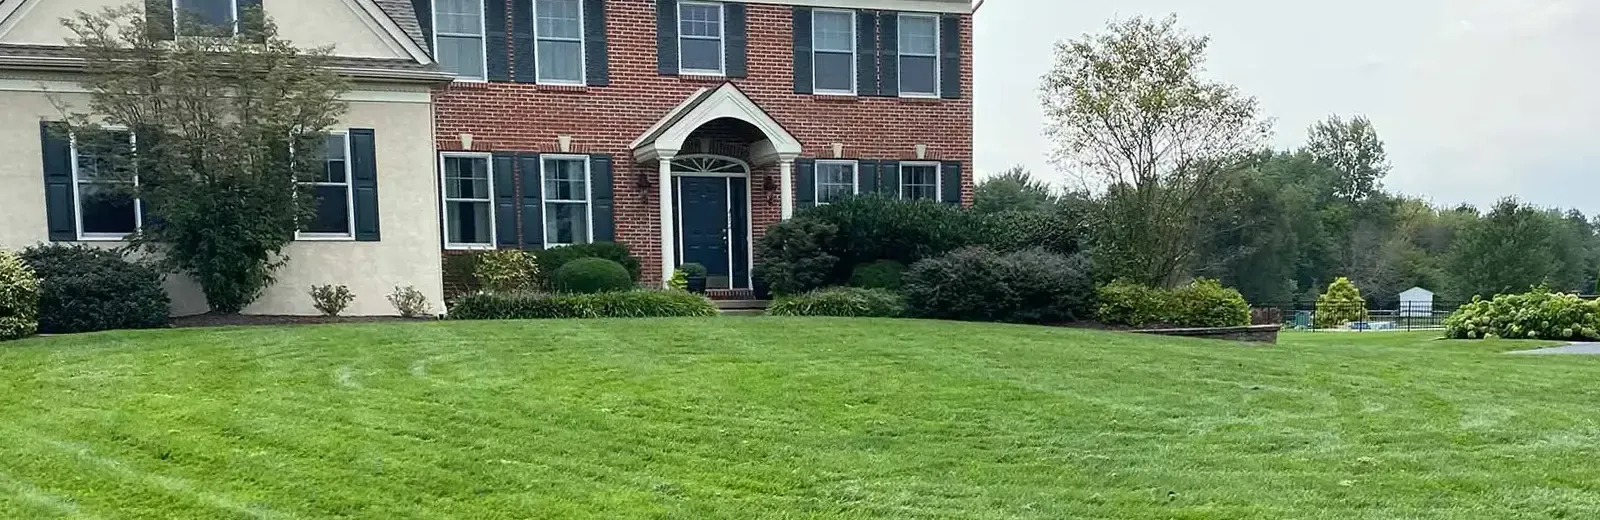 large brick home with healthy thick green grass